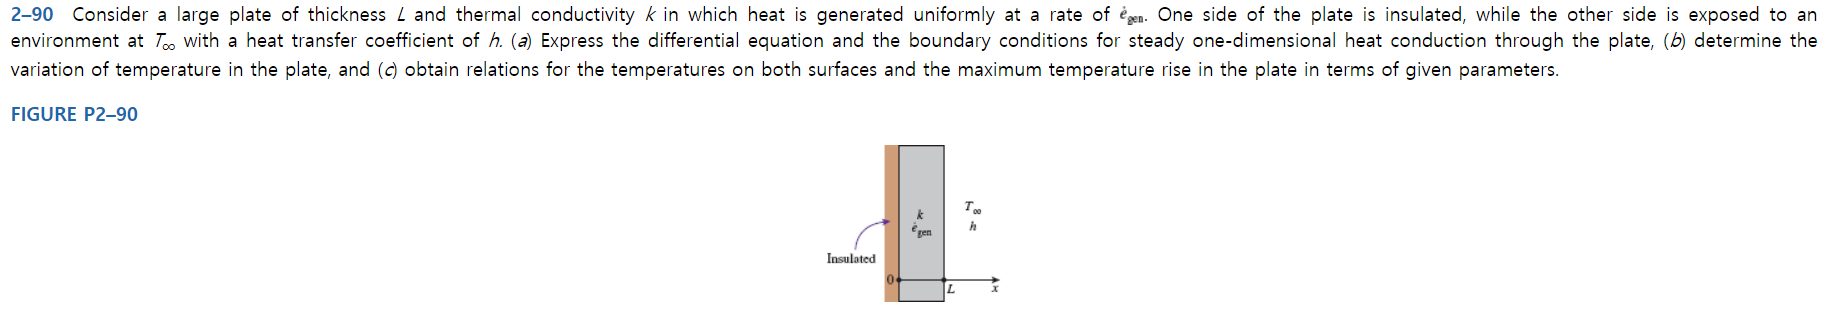 2-90 Consider a large plate of thickness L and thermal conductivity k in which heat is generated uniformly at a rate of egn. One side of the plate is insulated, while the other side is exposed to an
environment at Too With a heat transfer coefficient of h. (a) Express the differential equation and the boundary conditions for steady one-dimensional heat conduction through the plate, (b) determine the
variation of temperature in the plate, and (c) obtain relations for the temperatures on both surfaces and the maximum temperature rise in the plate in terms of given parameters.
FIGURE P2-90
т.
gen
Insulated
